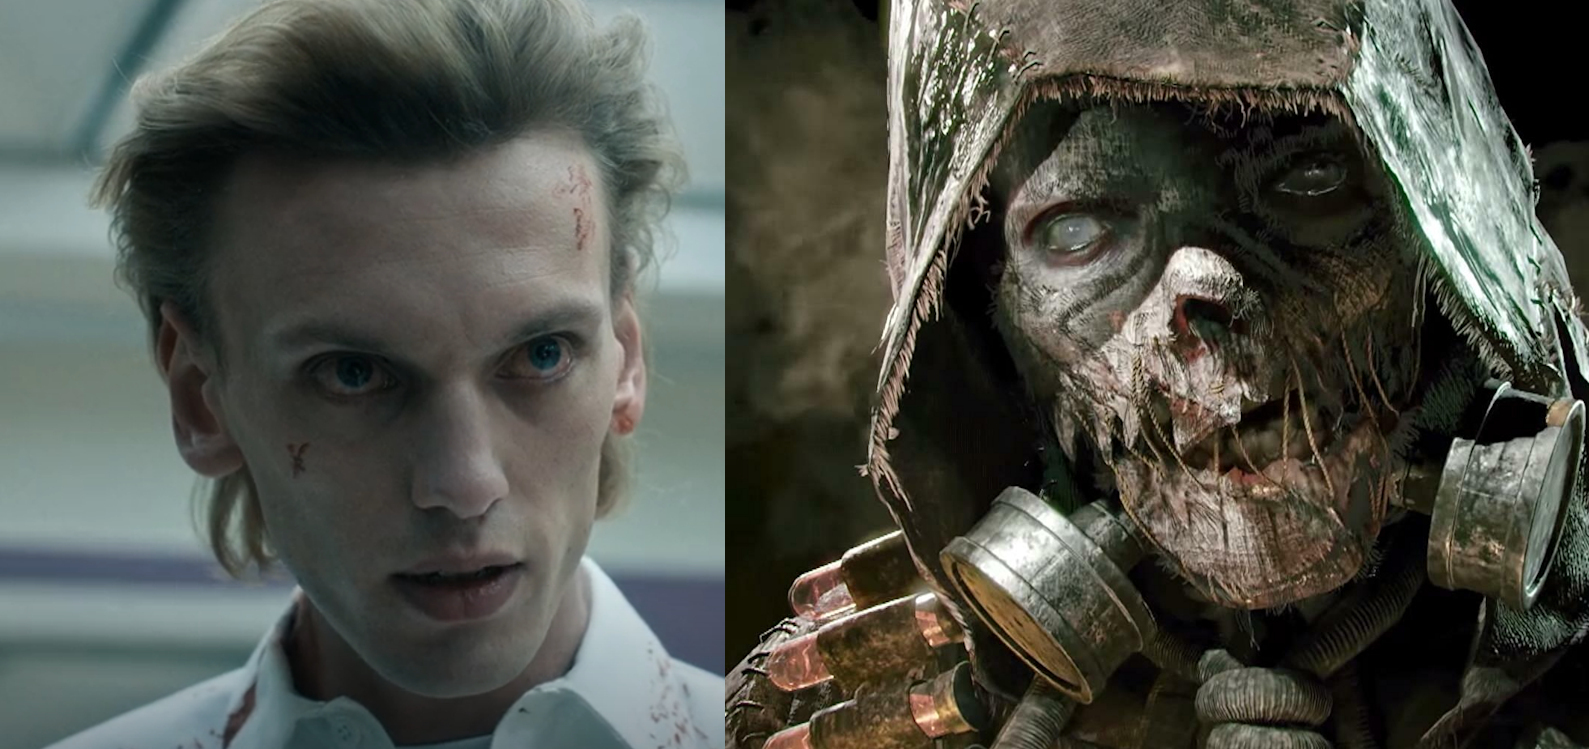 Stranger Things villain wants to play Scarecrow in Batman